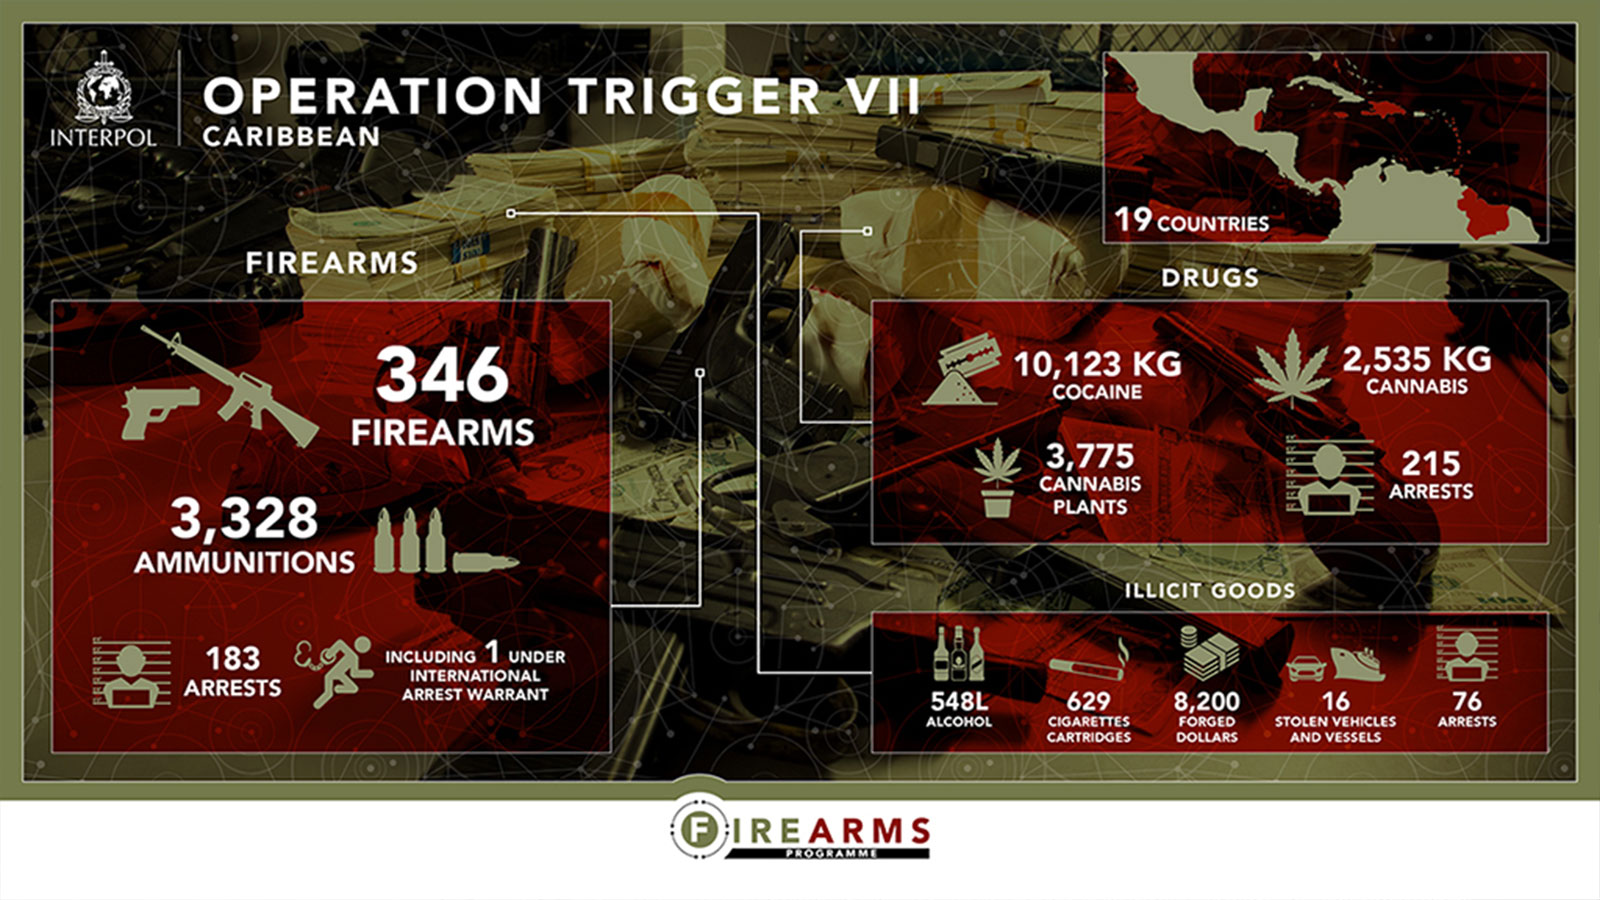 Operation Trigger VII Infographic